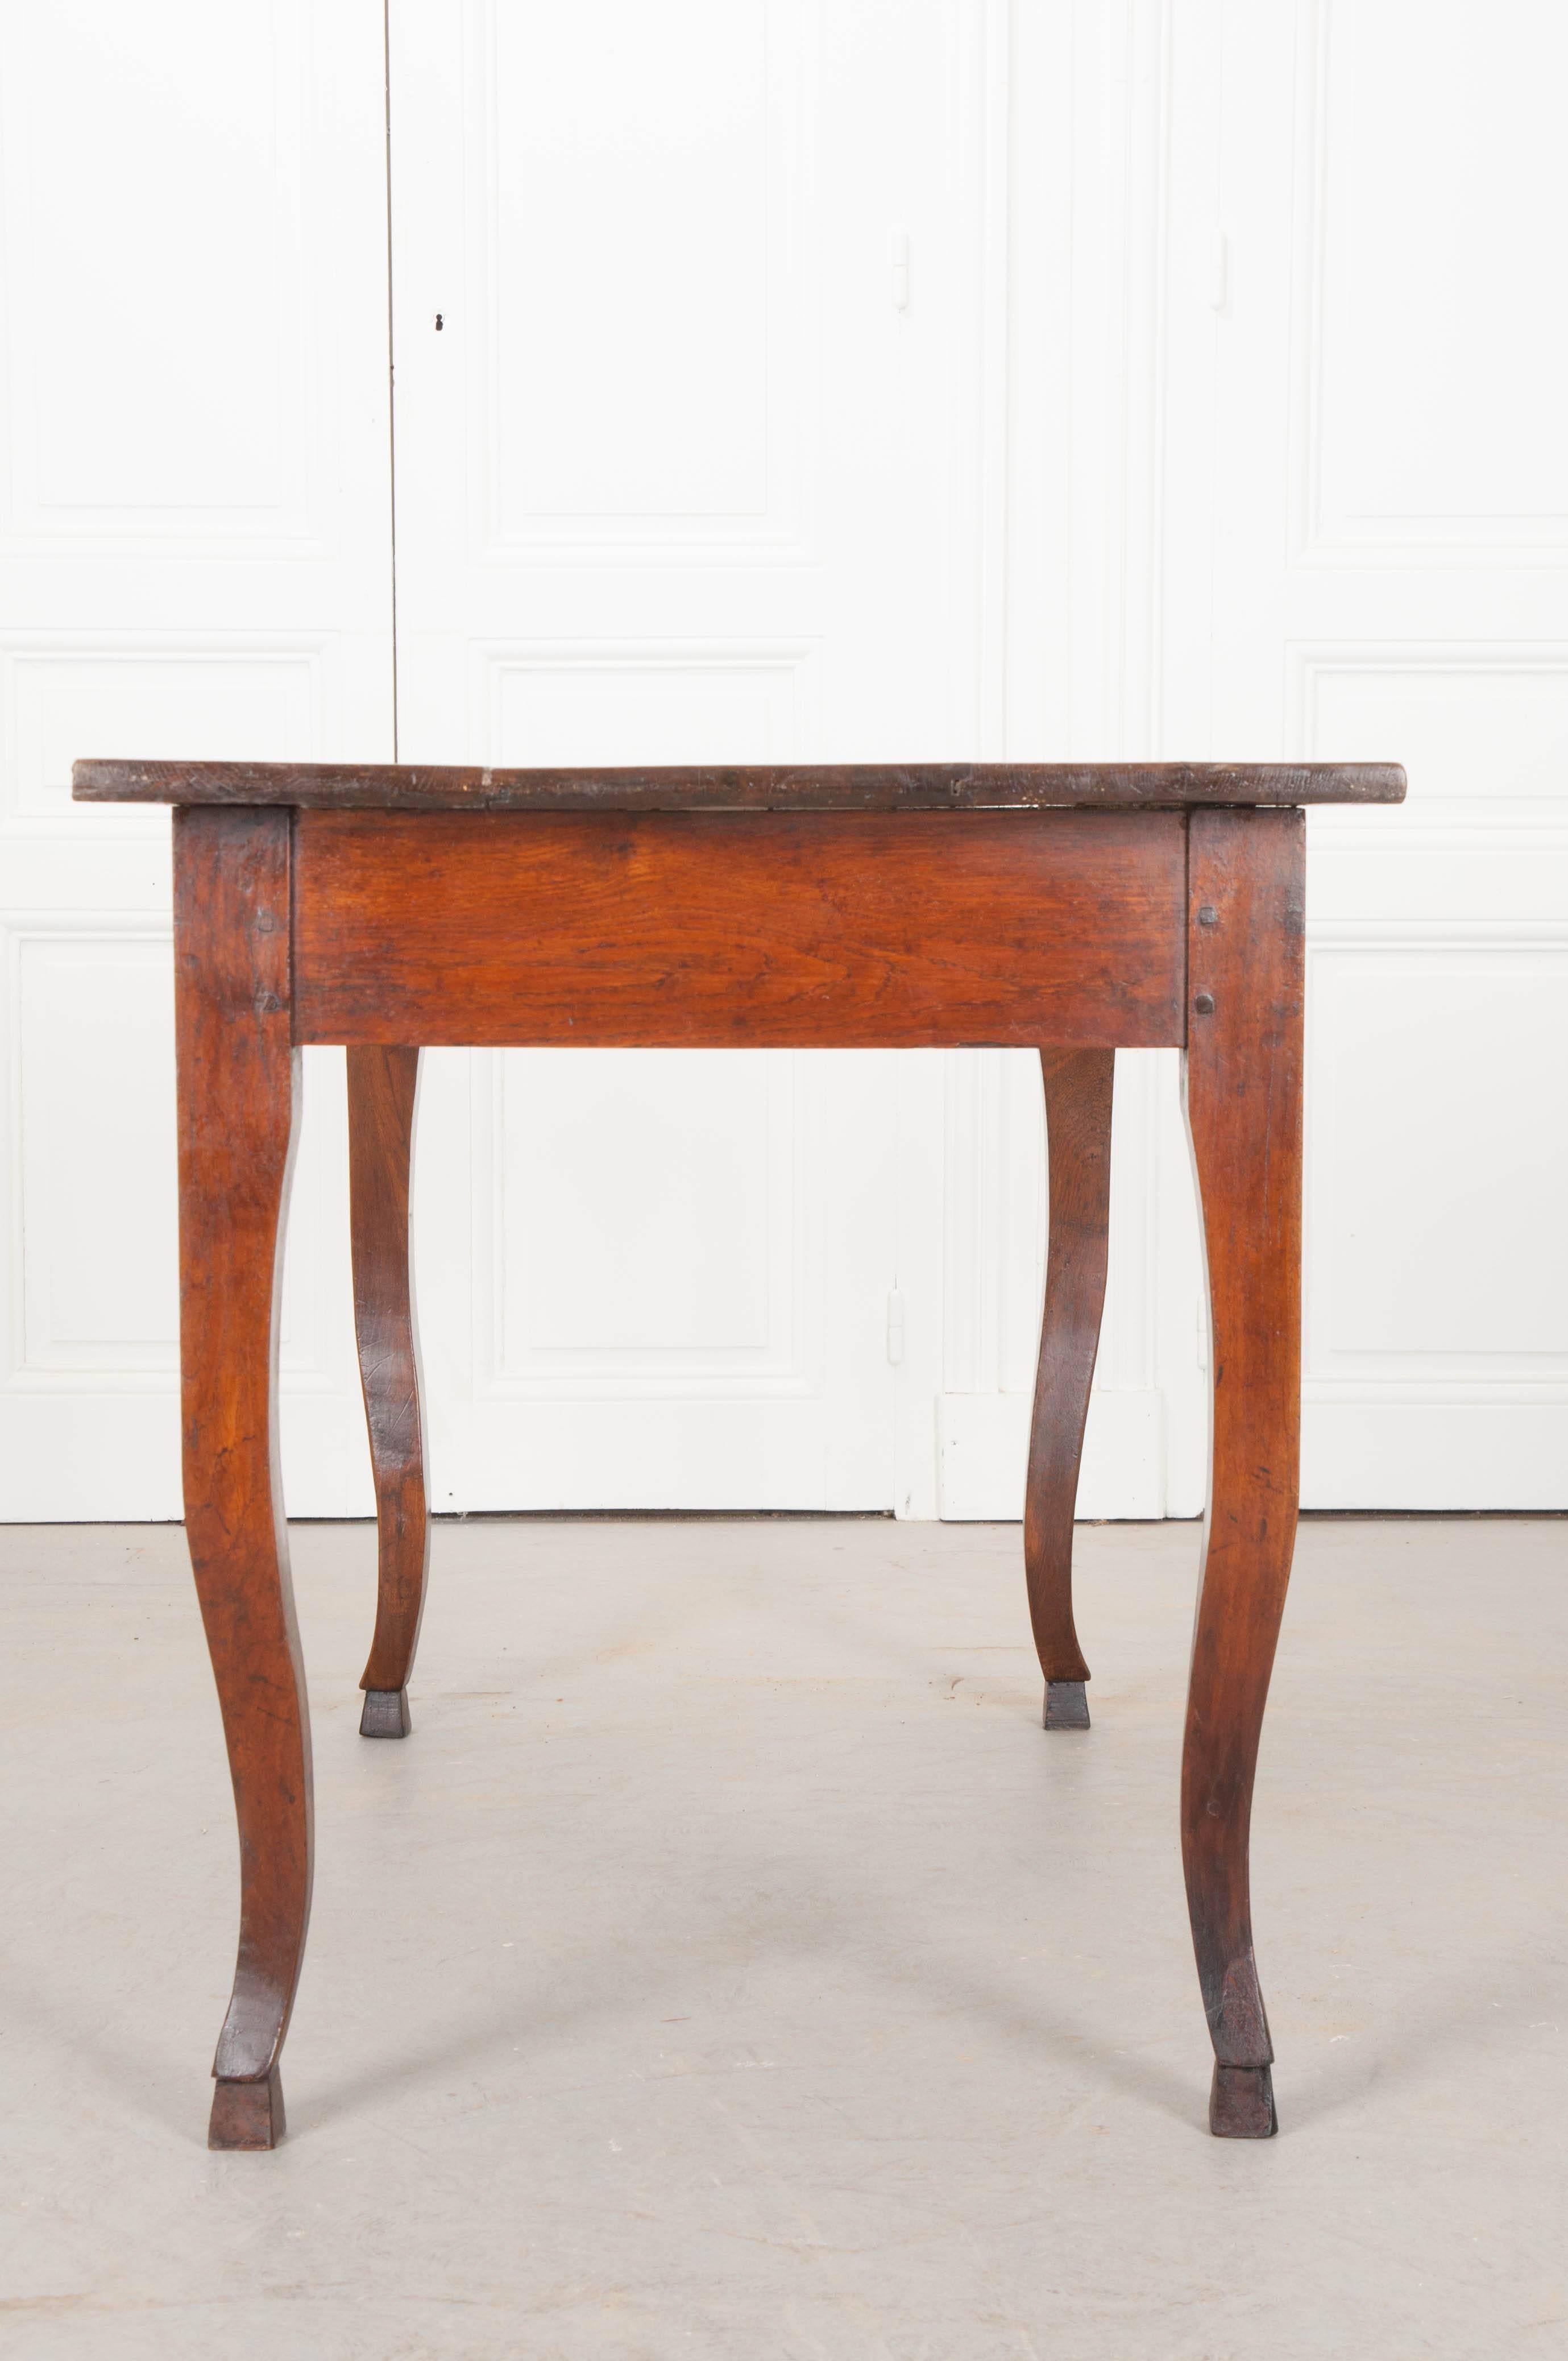 Country French, 19th Century Oak Cabriole Leg Table